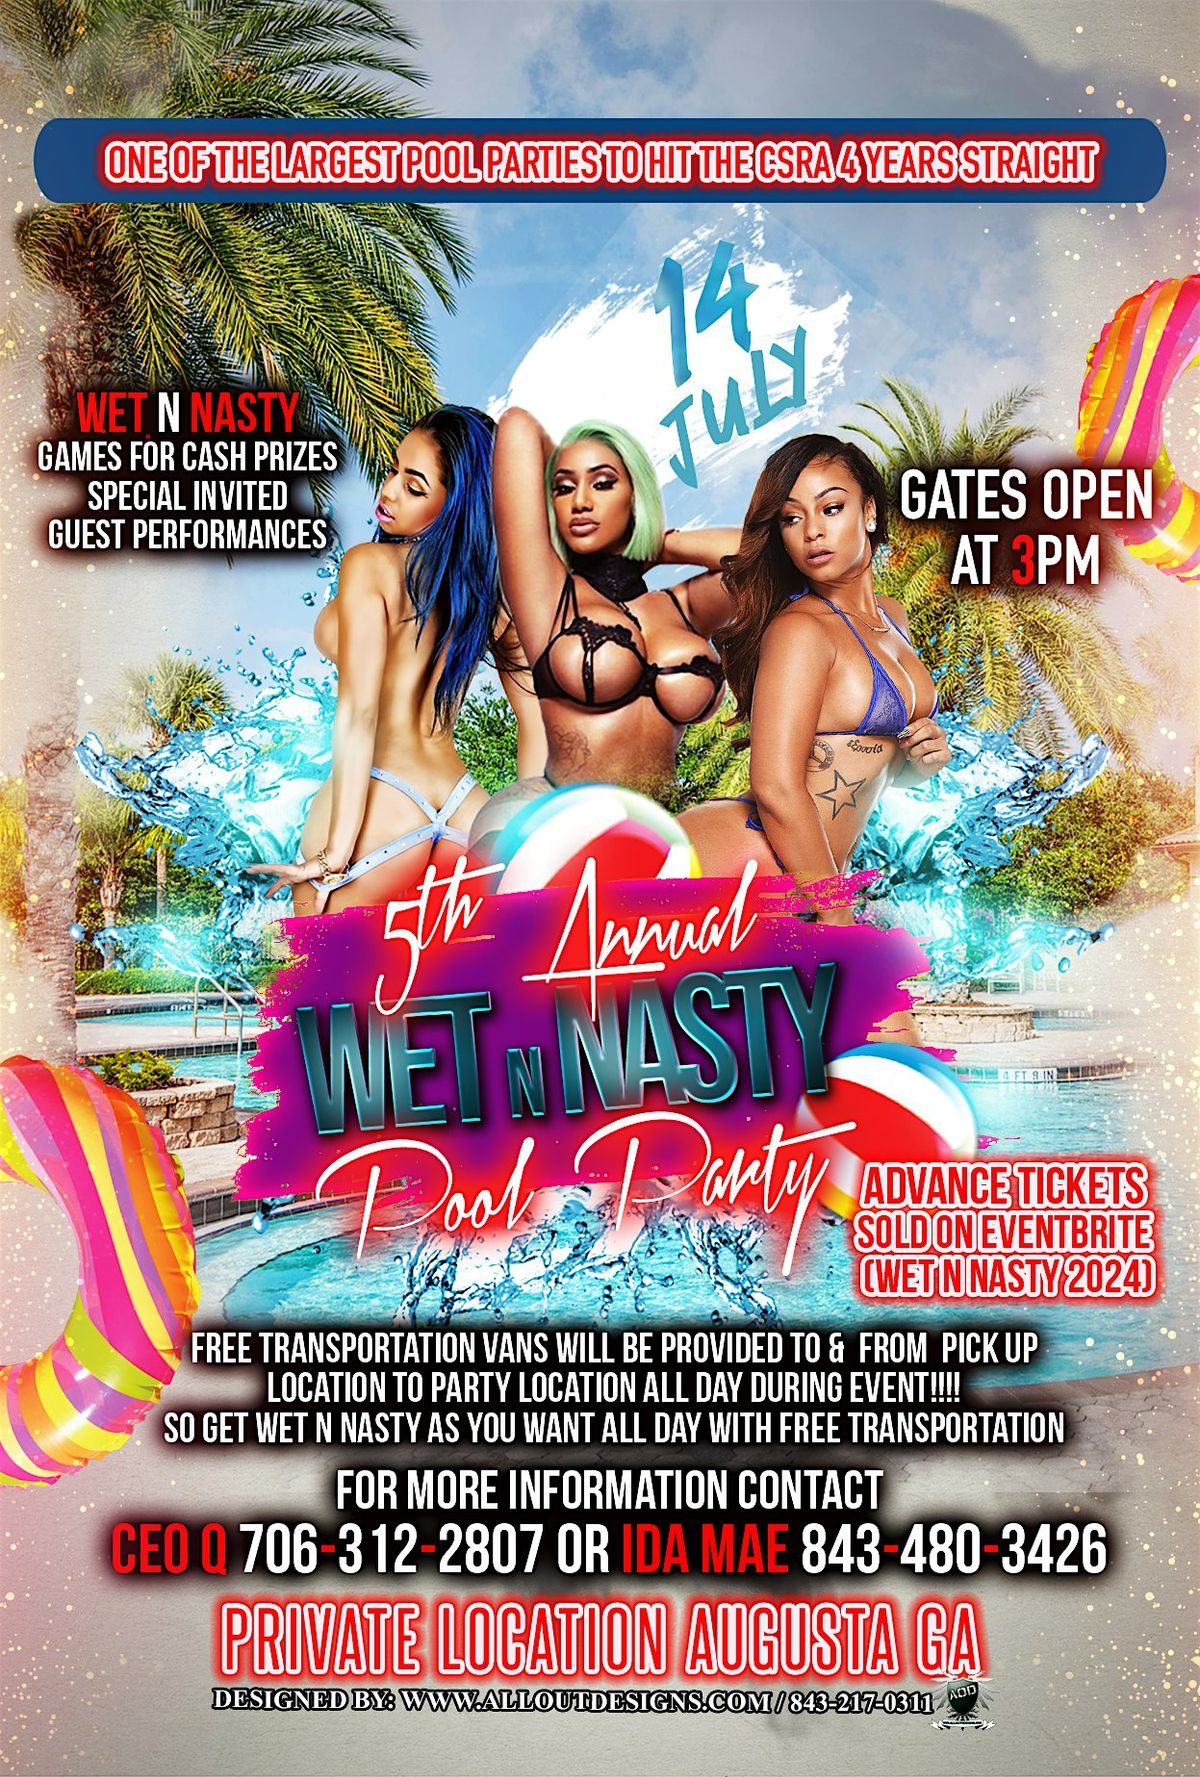 5TH ANNUAL WET N NASTY POOL PARTY PRIVATE LOCATION